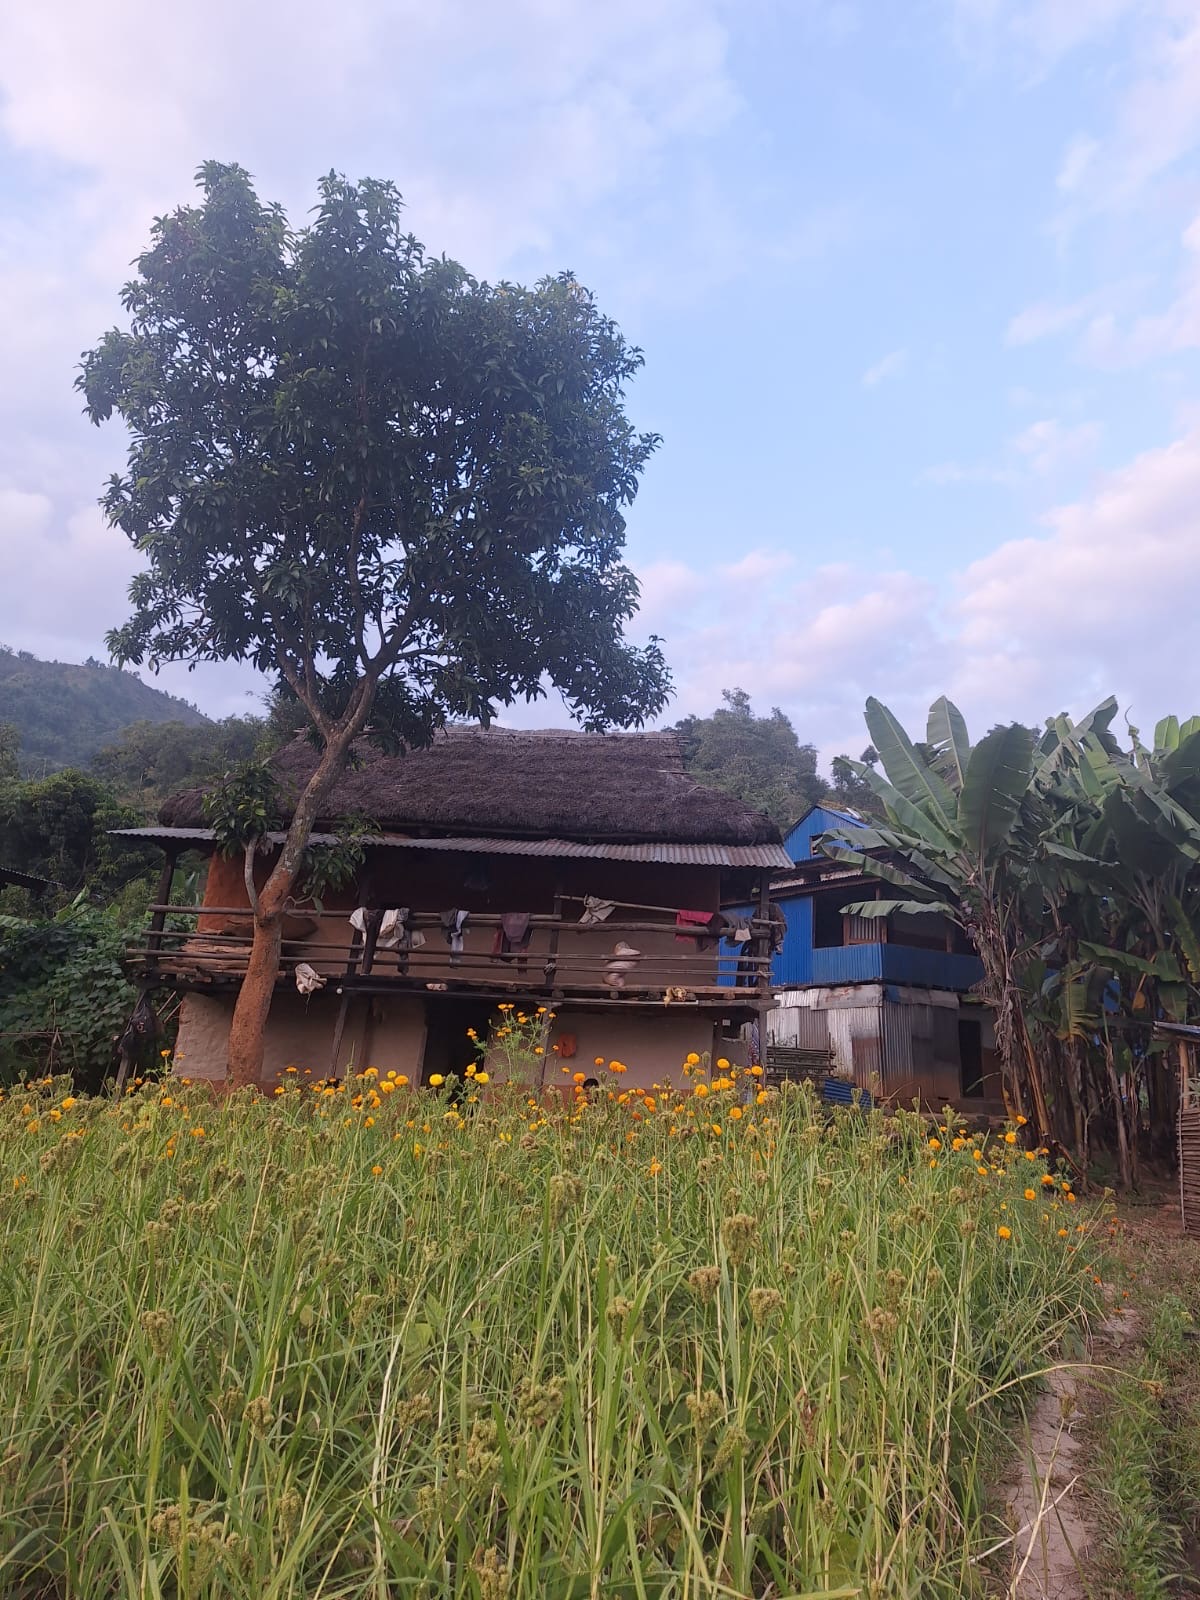 a picture of a house in a rural nepal